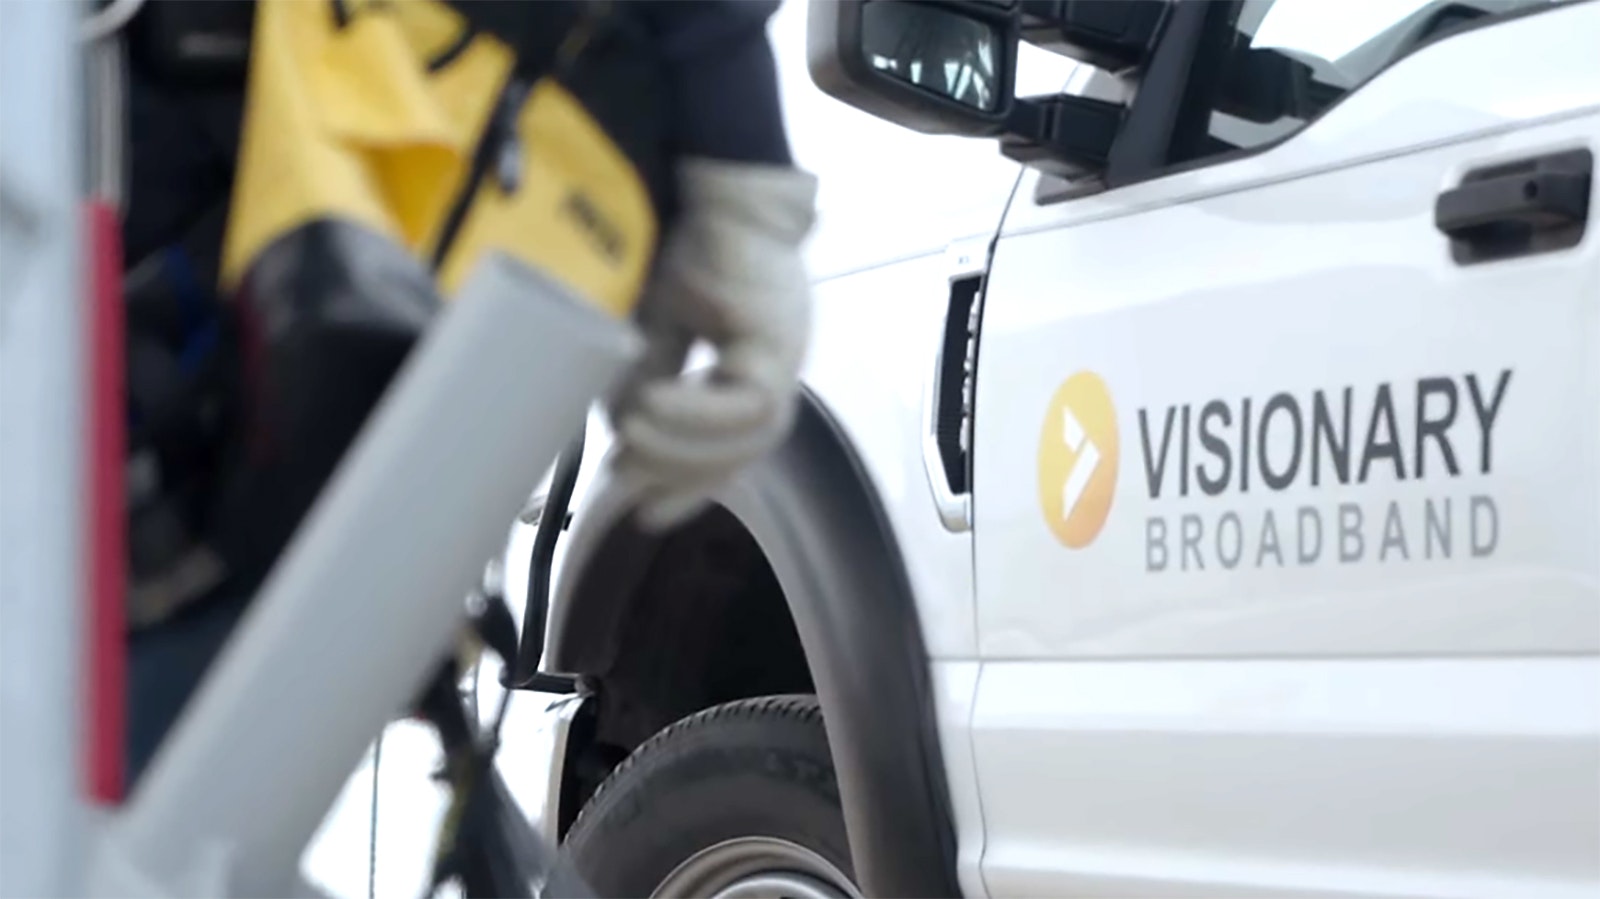 Visionary Broadband is a Wyoming-based company that has expanded into Montana and Colorado over the past 25 years.